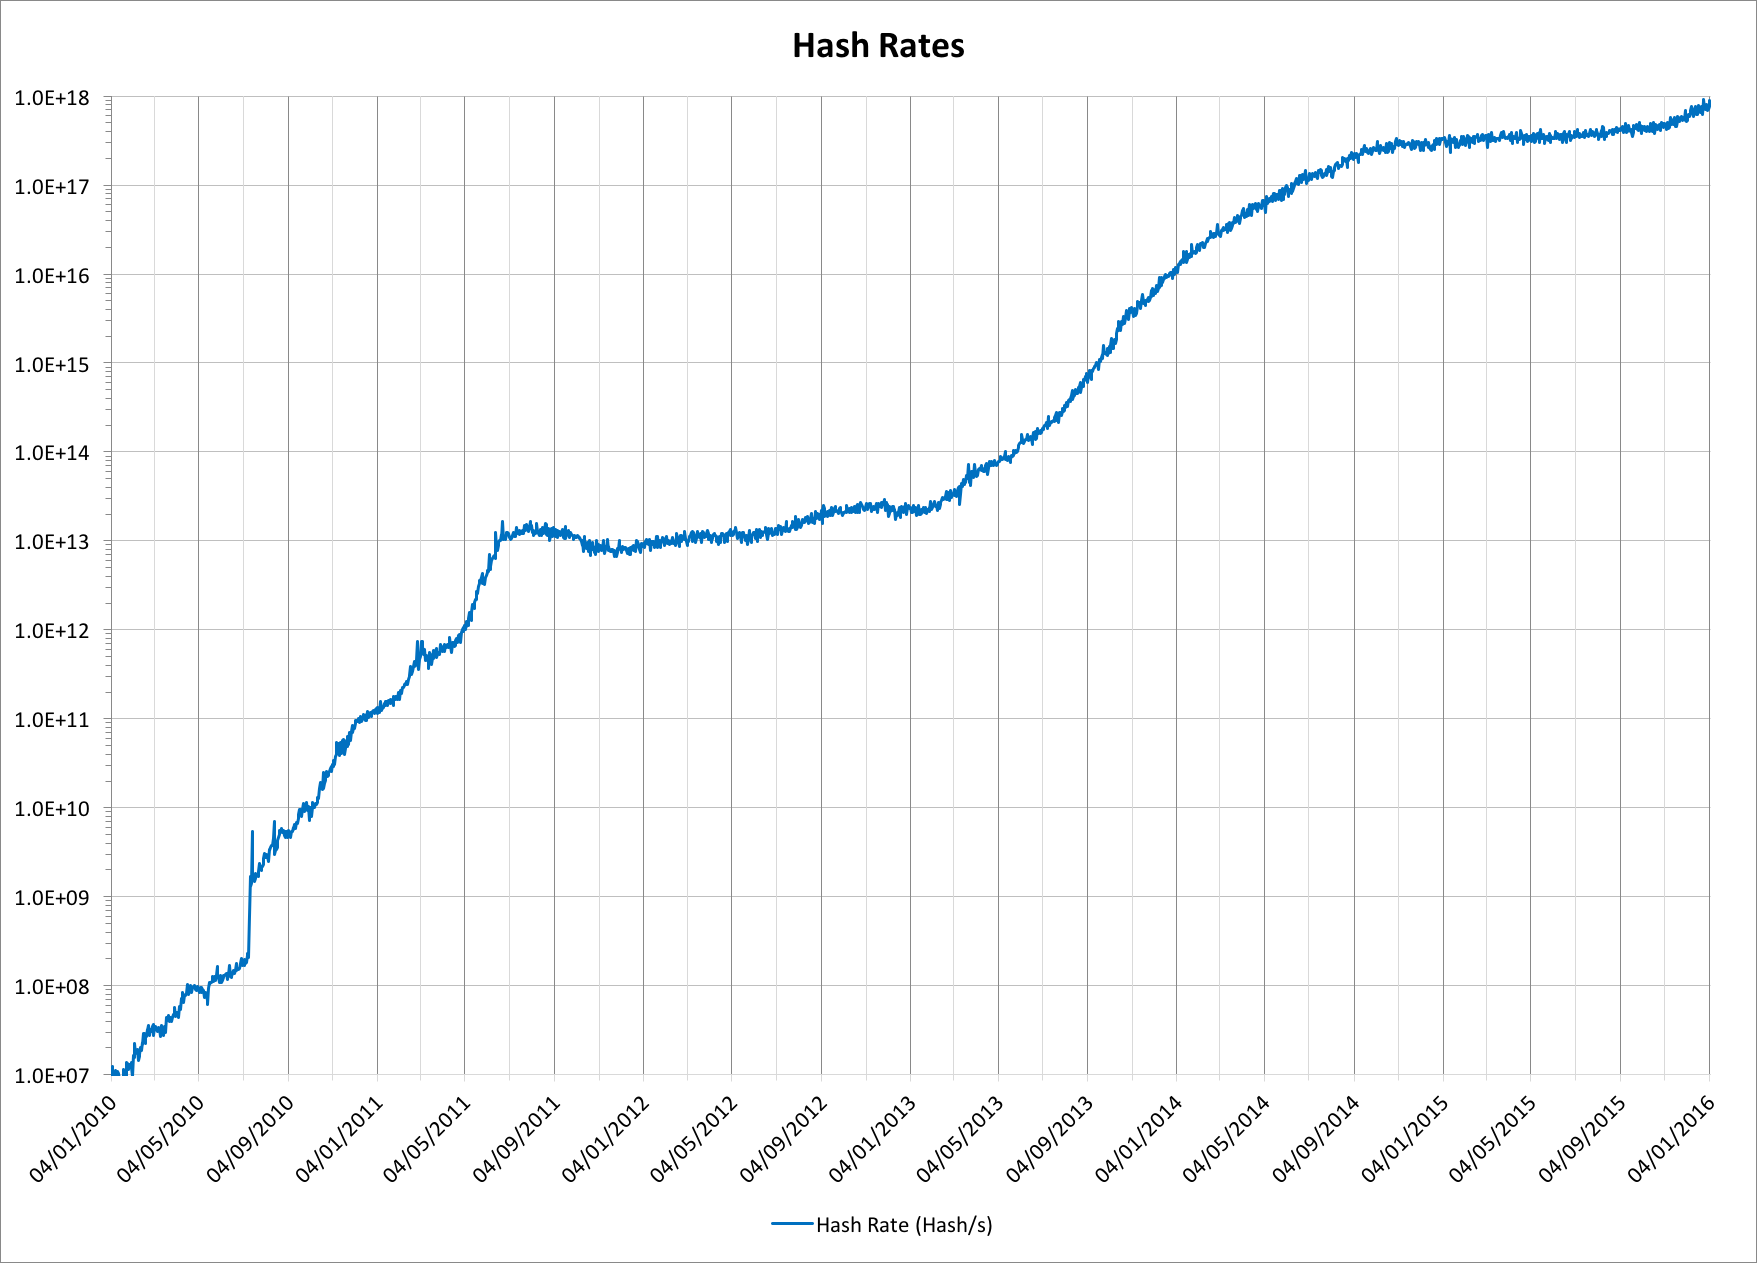 Hash rates in the Bitcoin network from 2010 to 2016